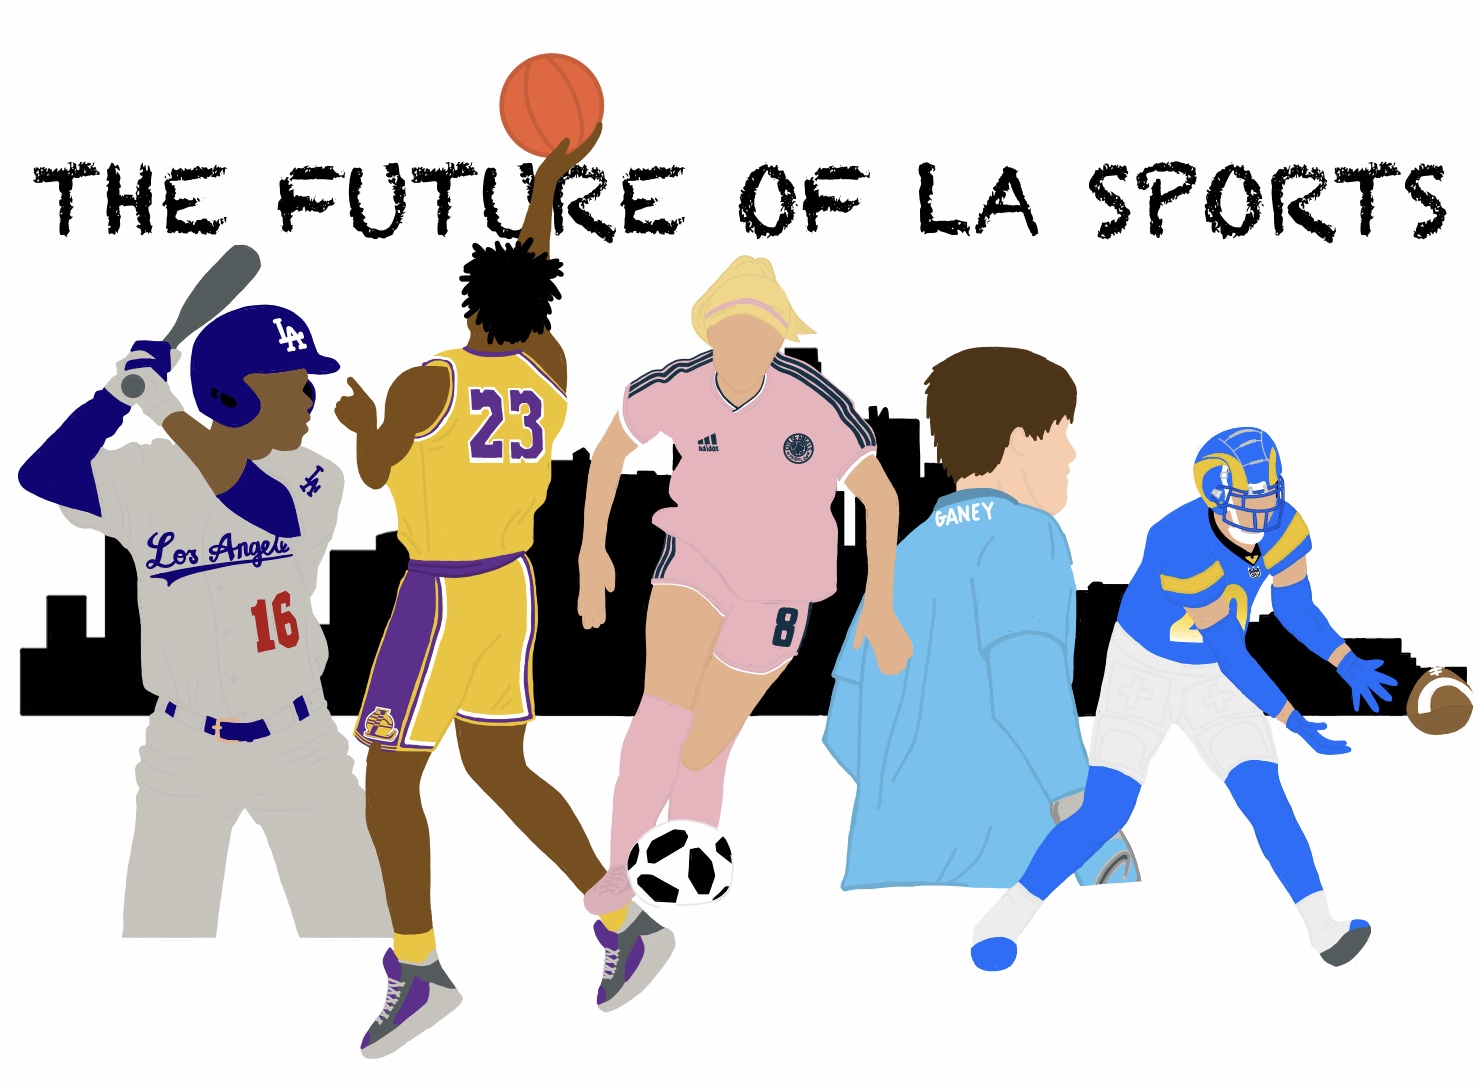 Culver City, USA. 18th May, 2020. Sports Legends featuring Lakers